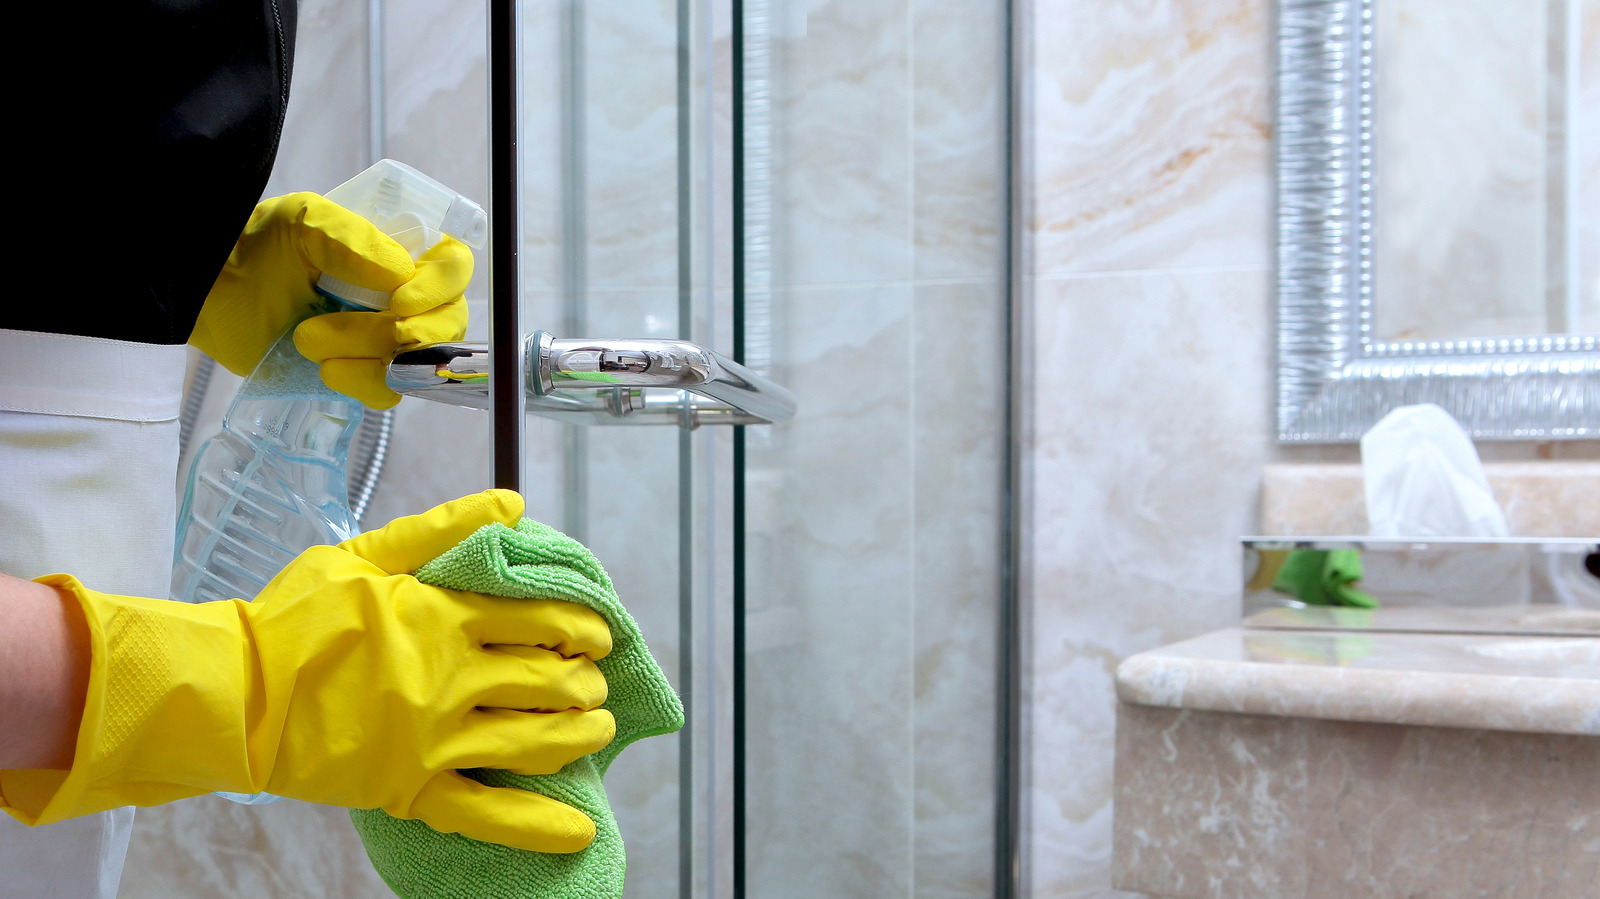 Use These Bathroom Cleaning Supplies to Keep a Bathroom Spotless